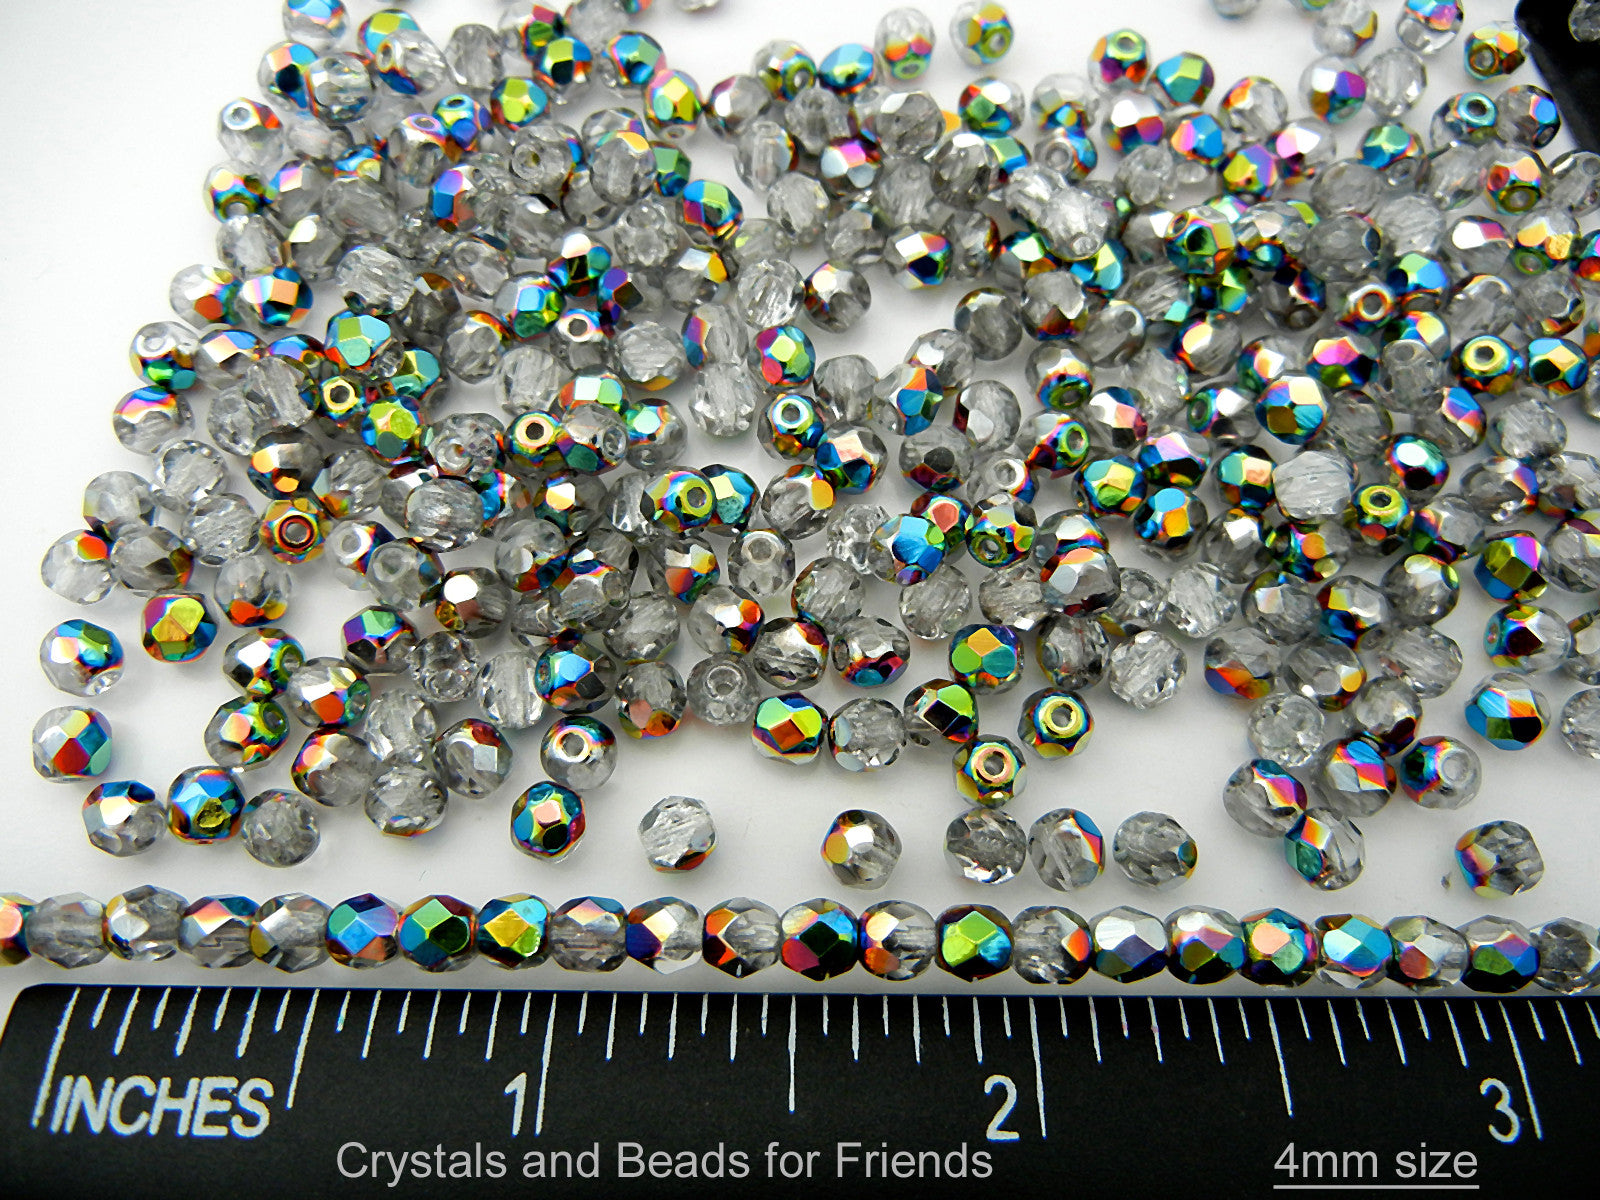 Crystal Vitrail (Vitrail Medium) coated, loose Czech Fire Polished Round Faceted Glass Beads, clear half coated with vitrail green metallic